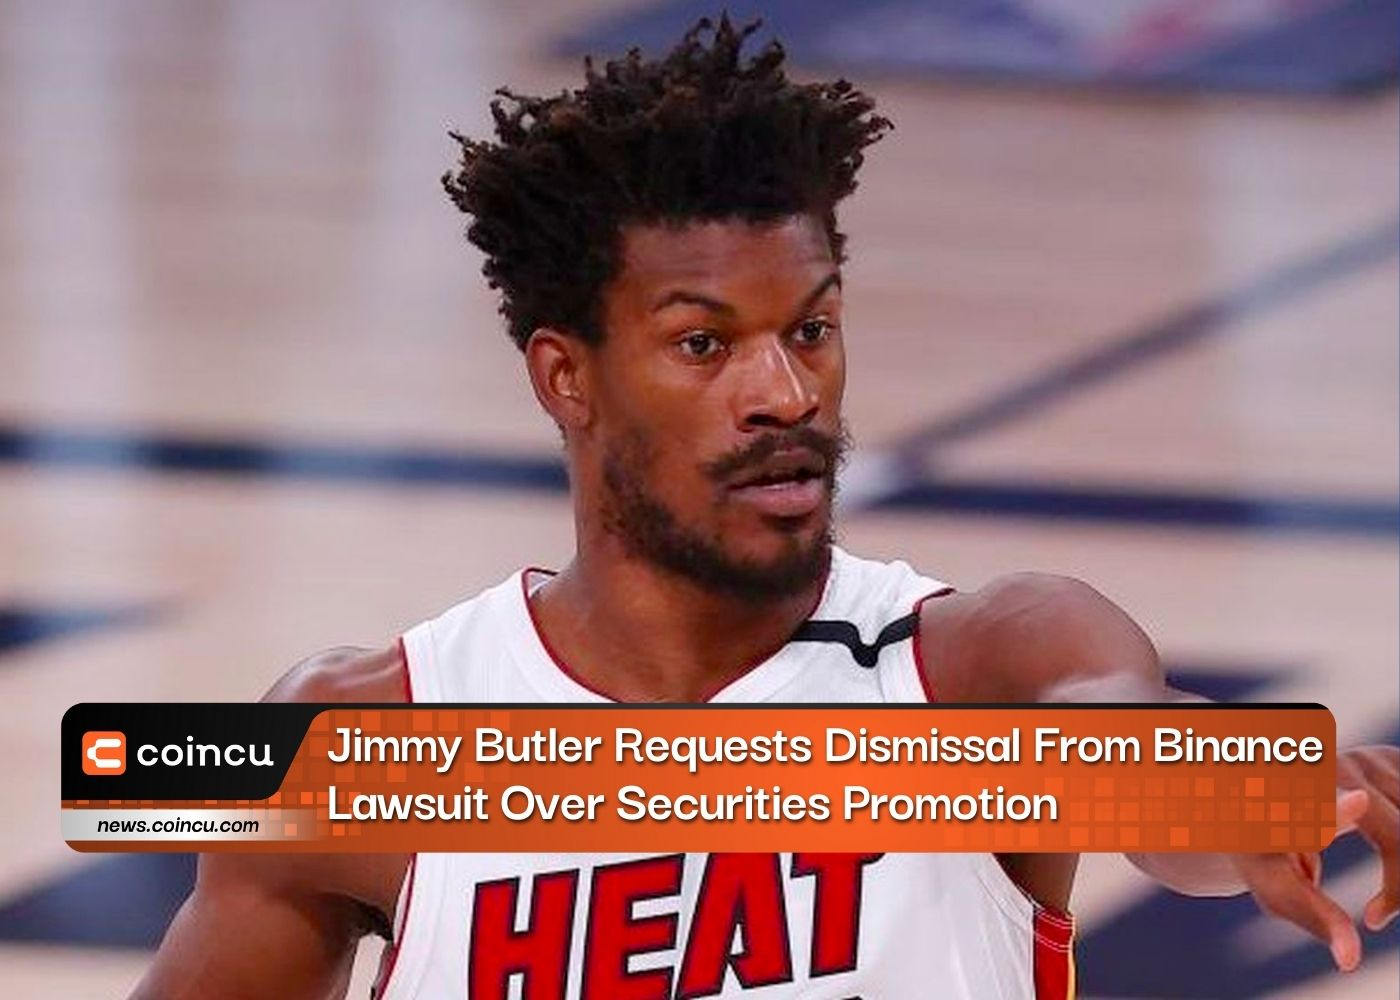 Jimmy Butler Requests Dismissal From Binance Lawsuit Over Securities Promotion